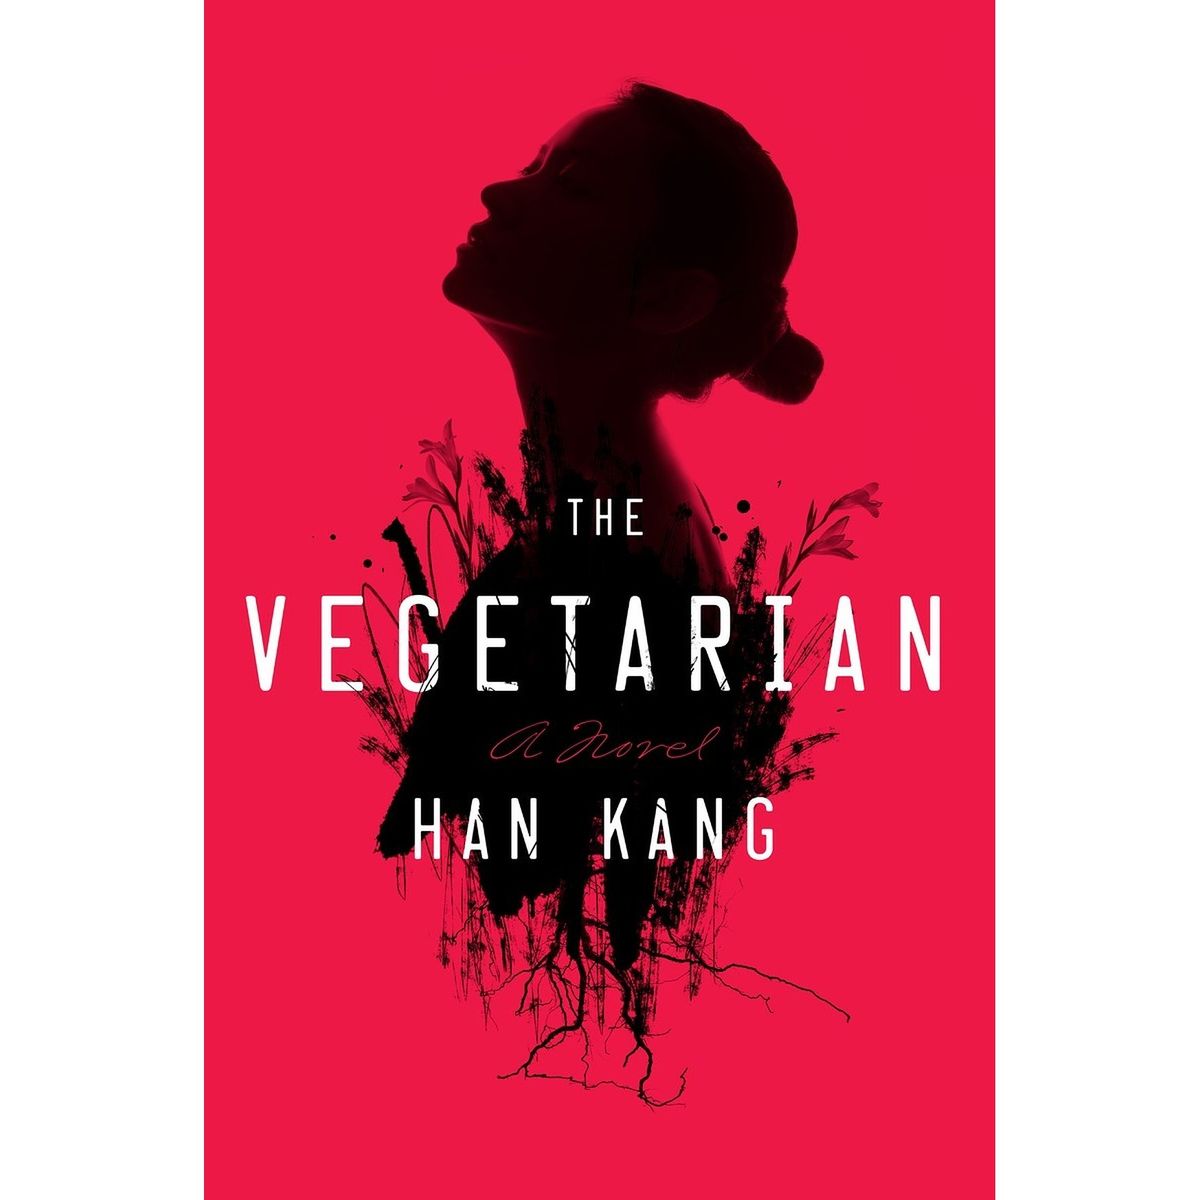 Kang’s “The Vegetarian” Offers a Cerebral Take On Autonomy